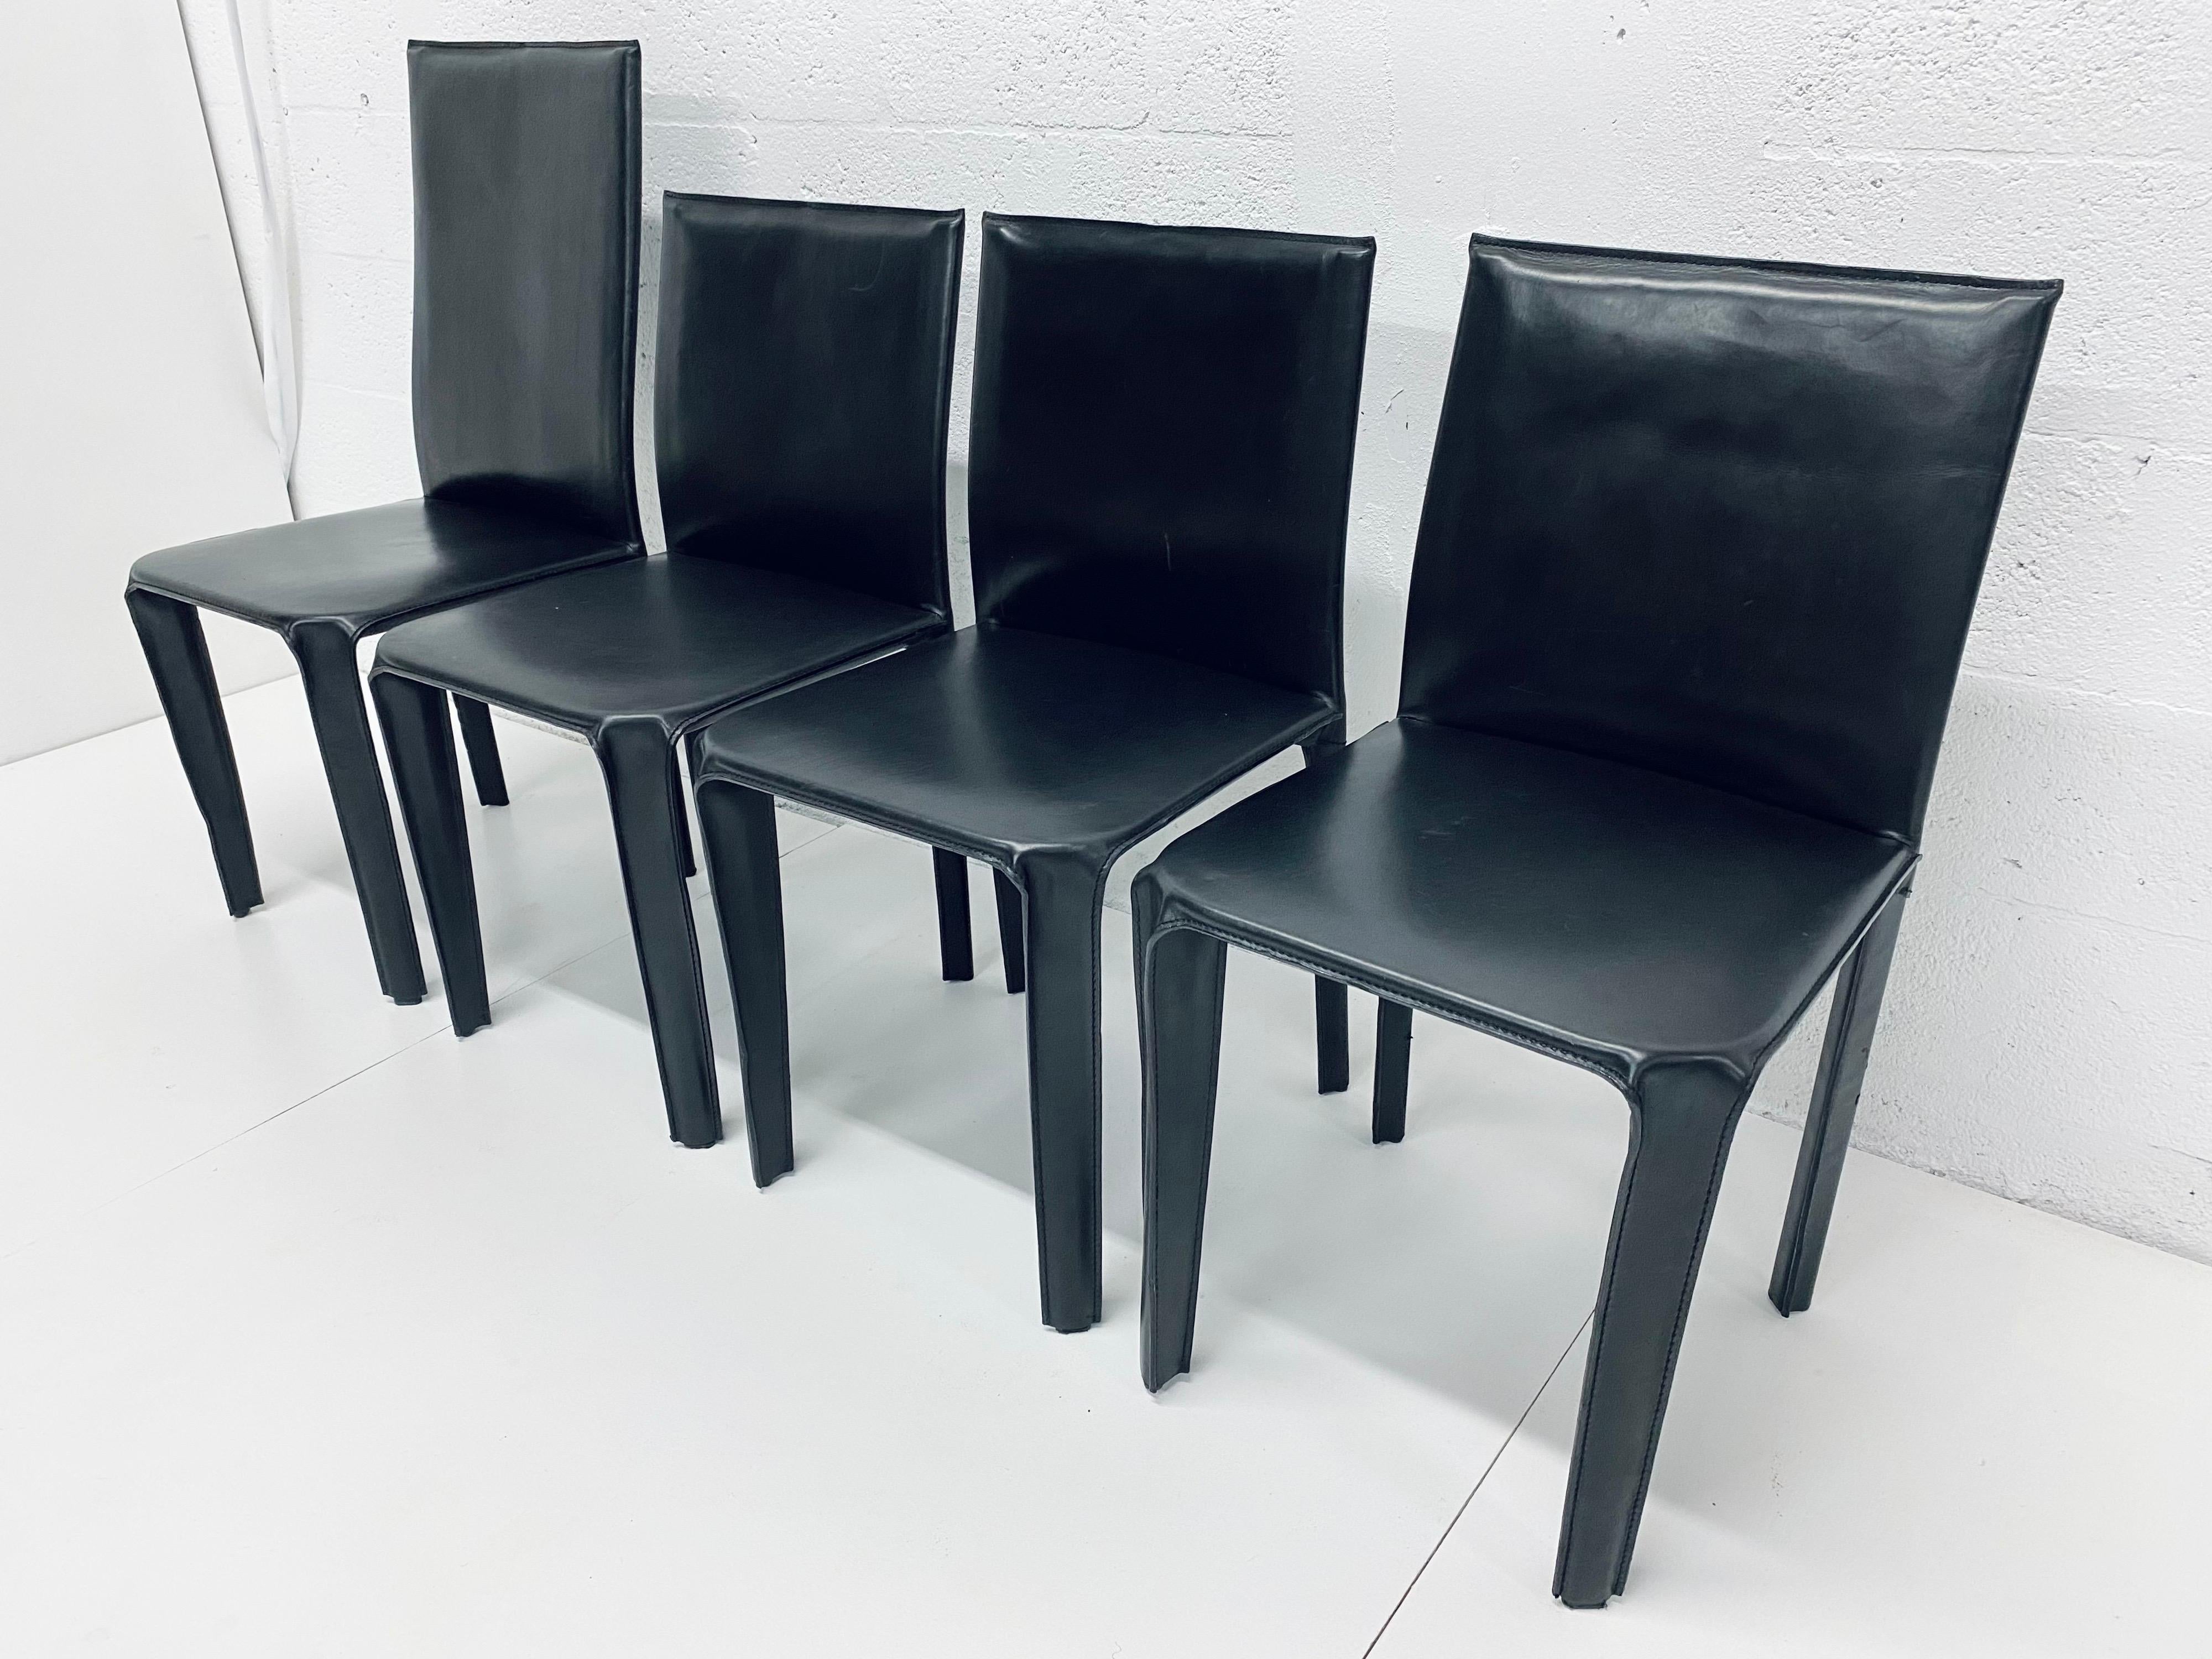 Set of four Italian black leather dining chairs by Arper. Each chair is stamped 